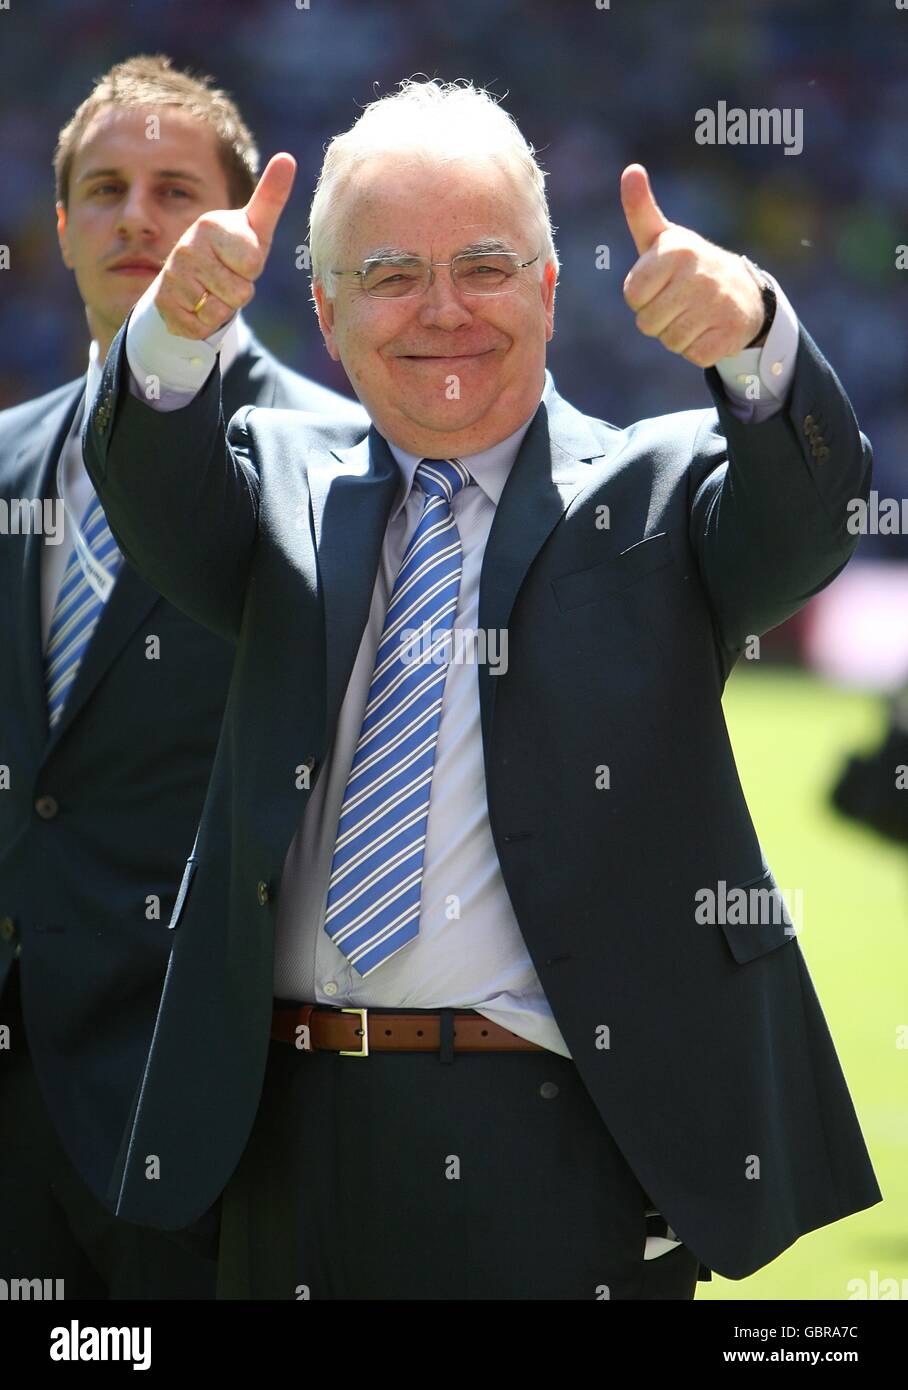 Soccer - FA Cup - Final - Chelsea v Everton - Wembley Stadium. Everton chairman Bill Kenwright gives the thumbs up prior to kick off Stock Photo